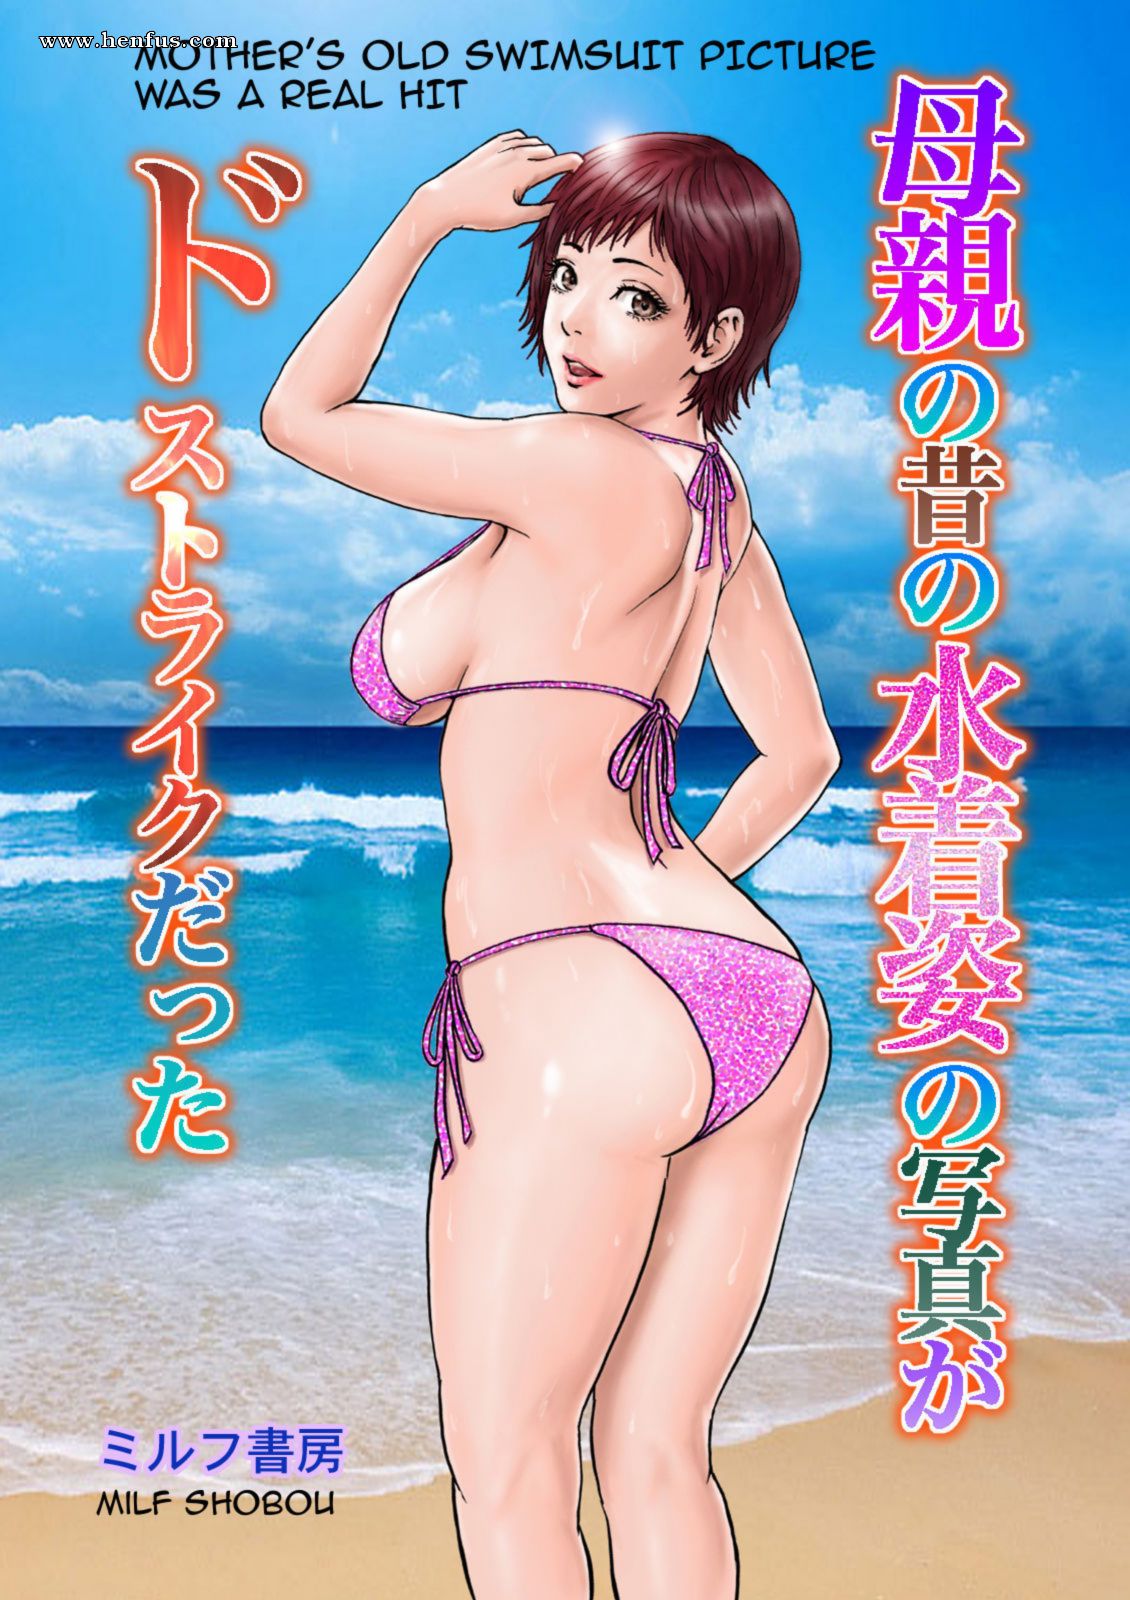 Mom Son Beach Porn - Page 1 | Milf-Shobou/Mothers-Old-Swimsuit-Picture-Was-A-Real-Hit | Henfus -  Hentai and Manga Sex and Porn Comics